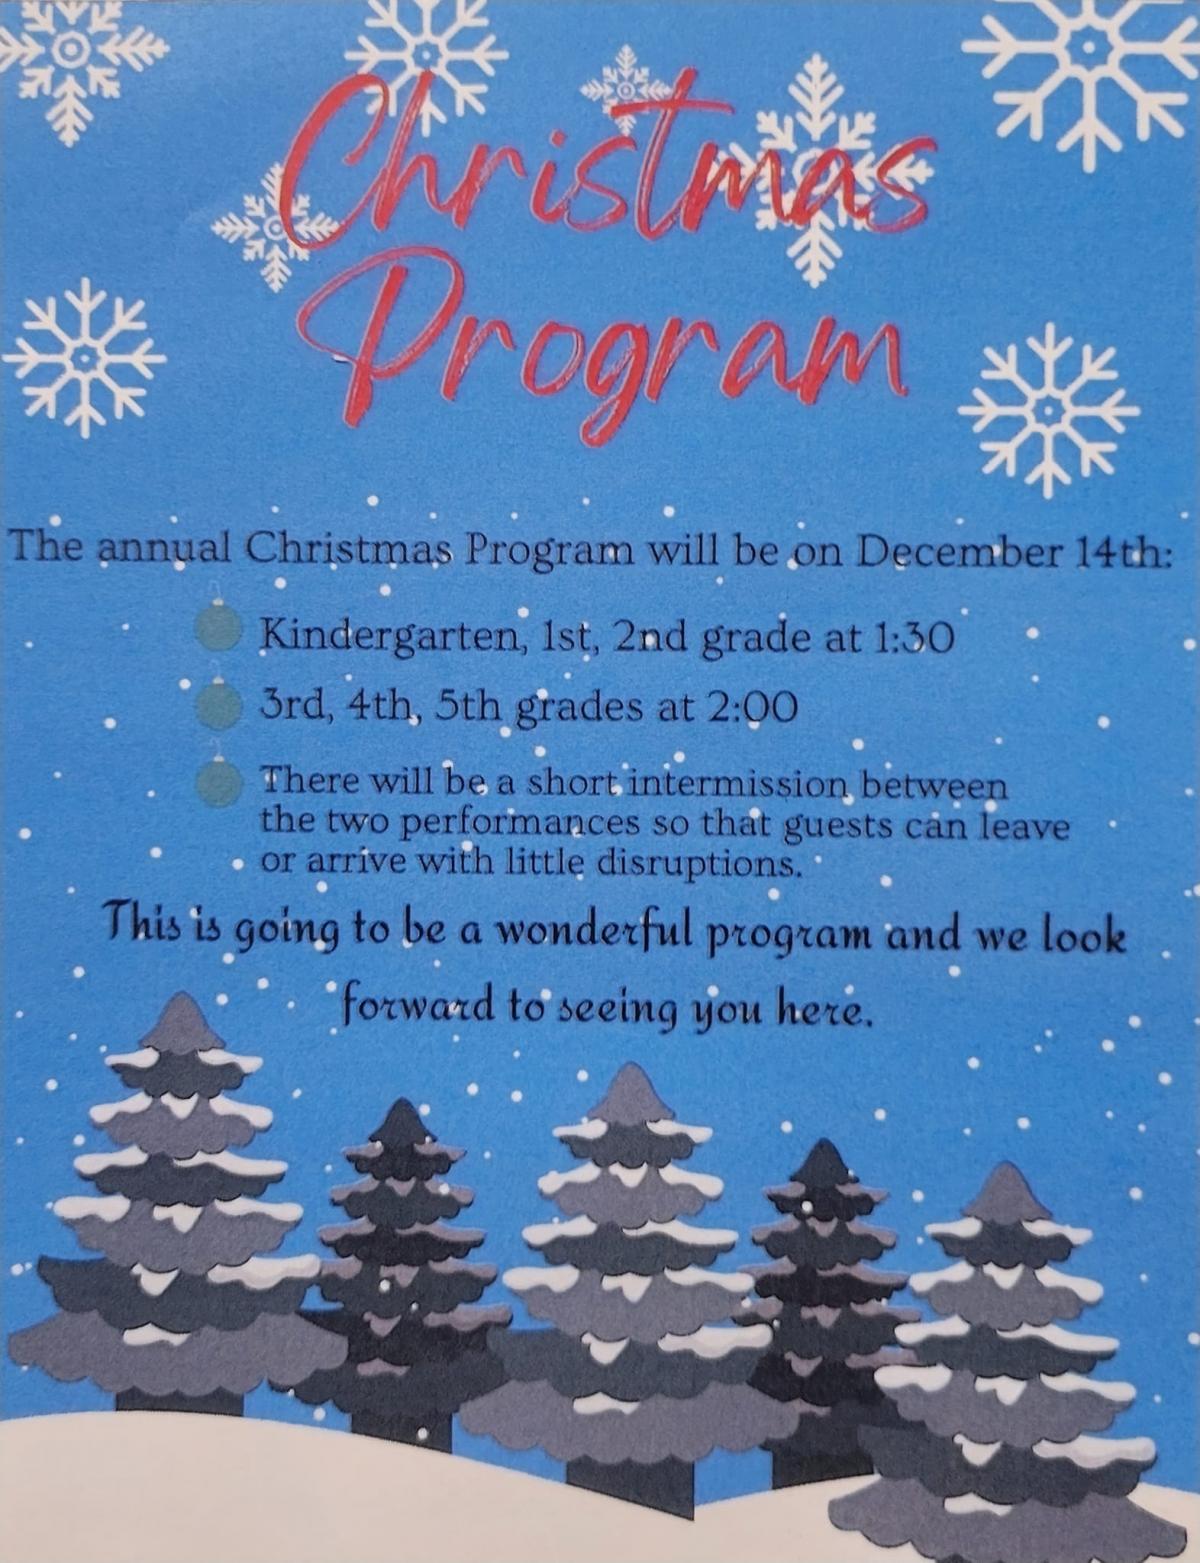 Annual Elementary Christmas Program - 12/14 starting at 1:30 pm